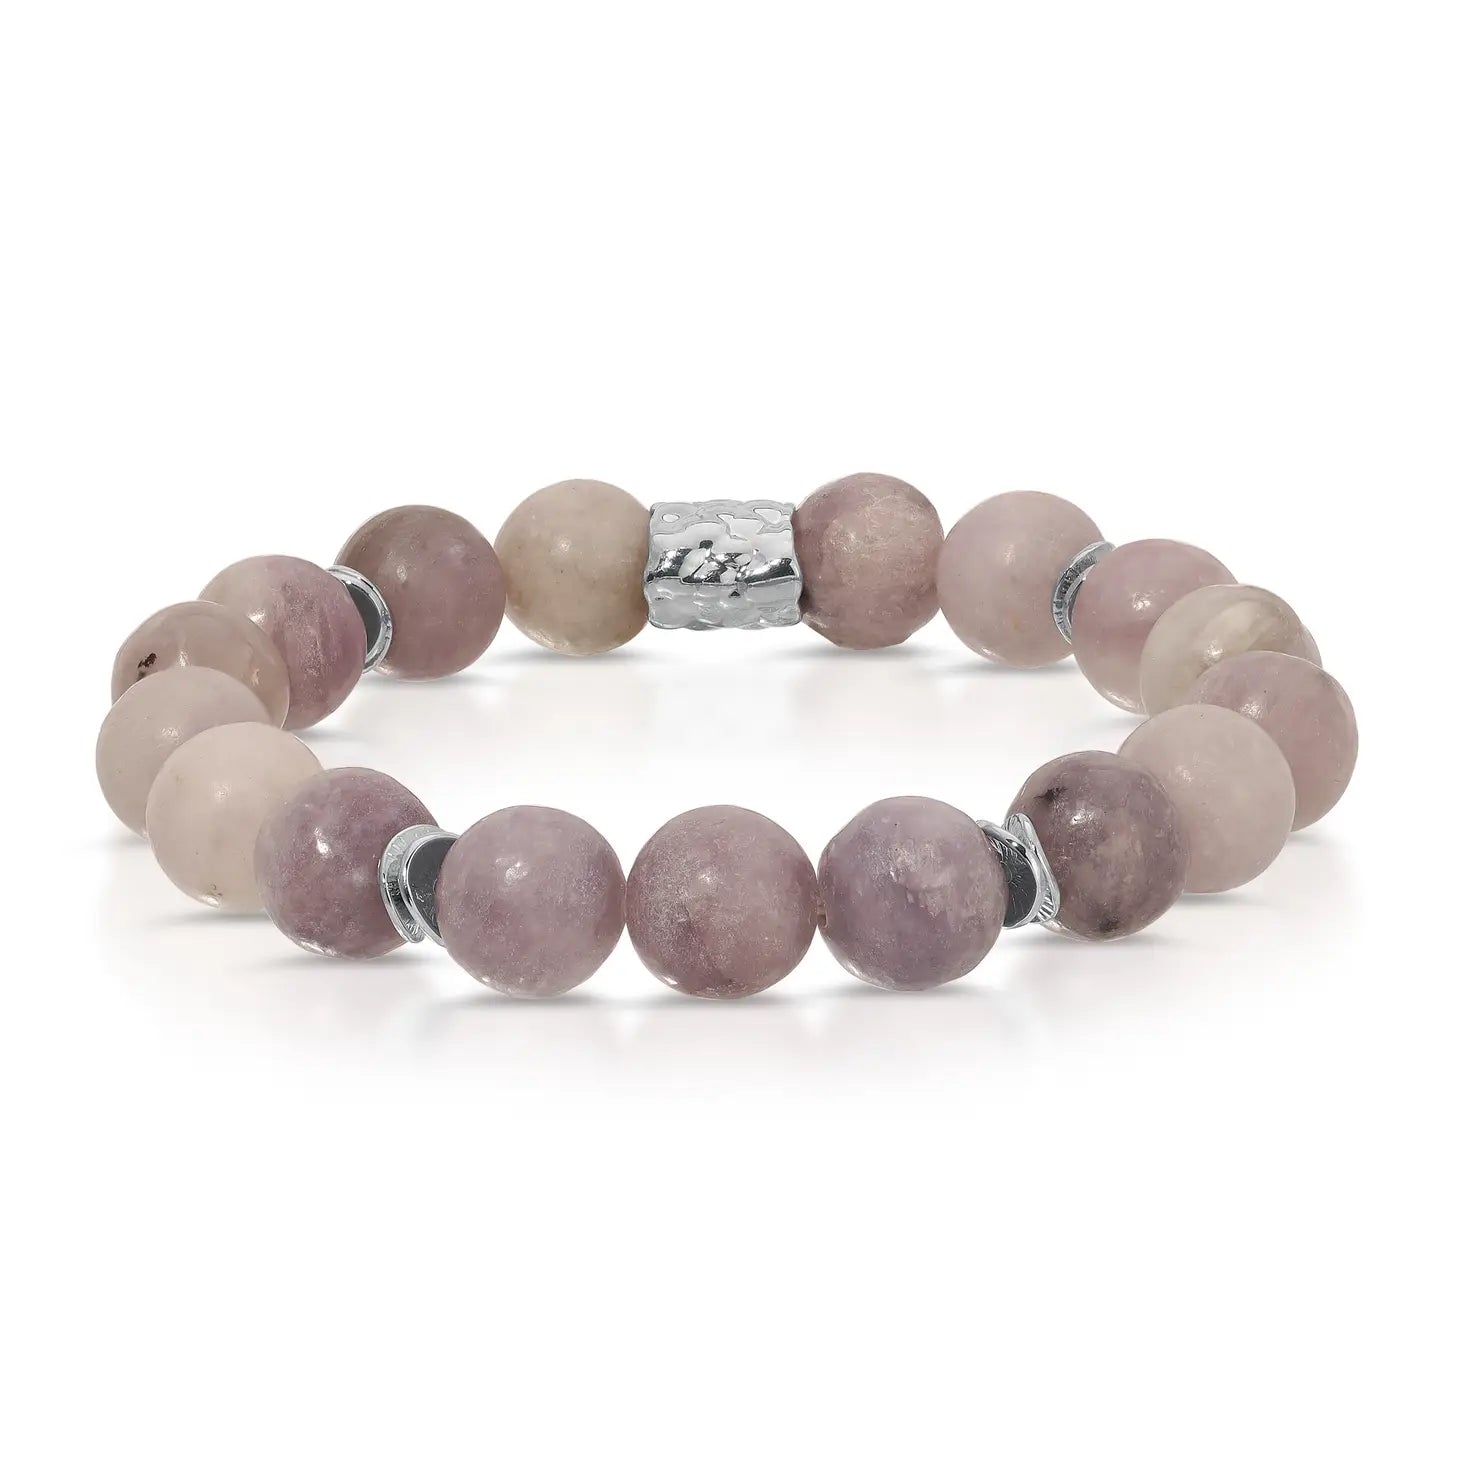 Lilac Jade - 10mm gemstone Bracelet - GB1271 - The Hare and the Moon